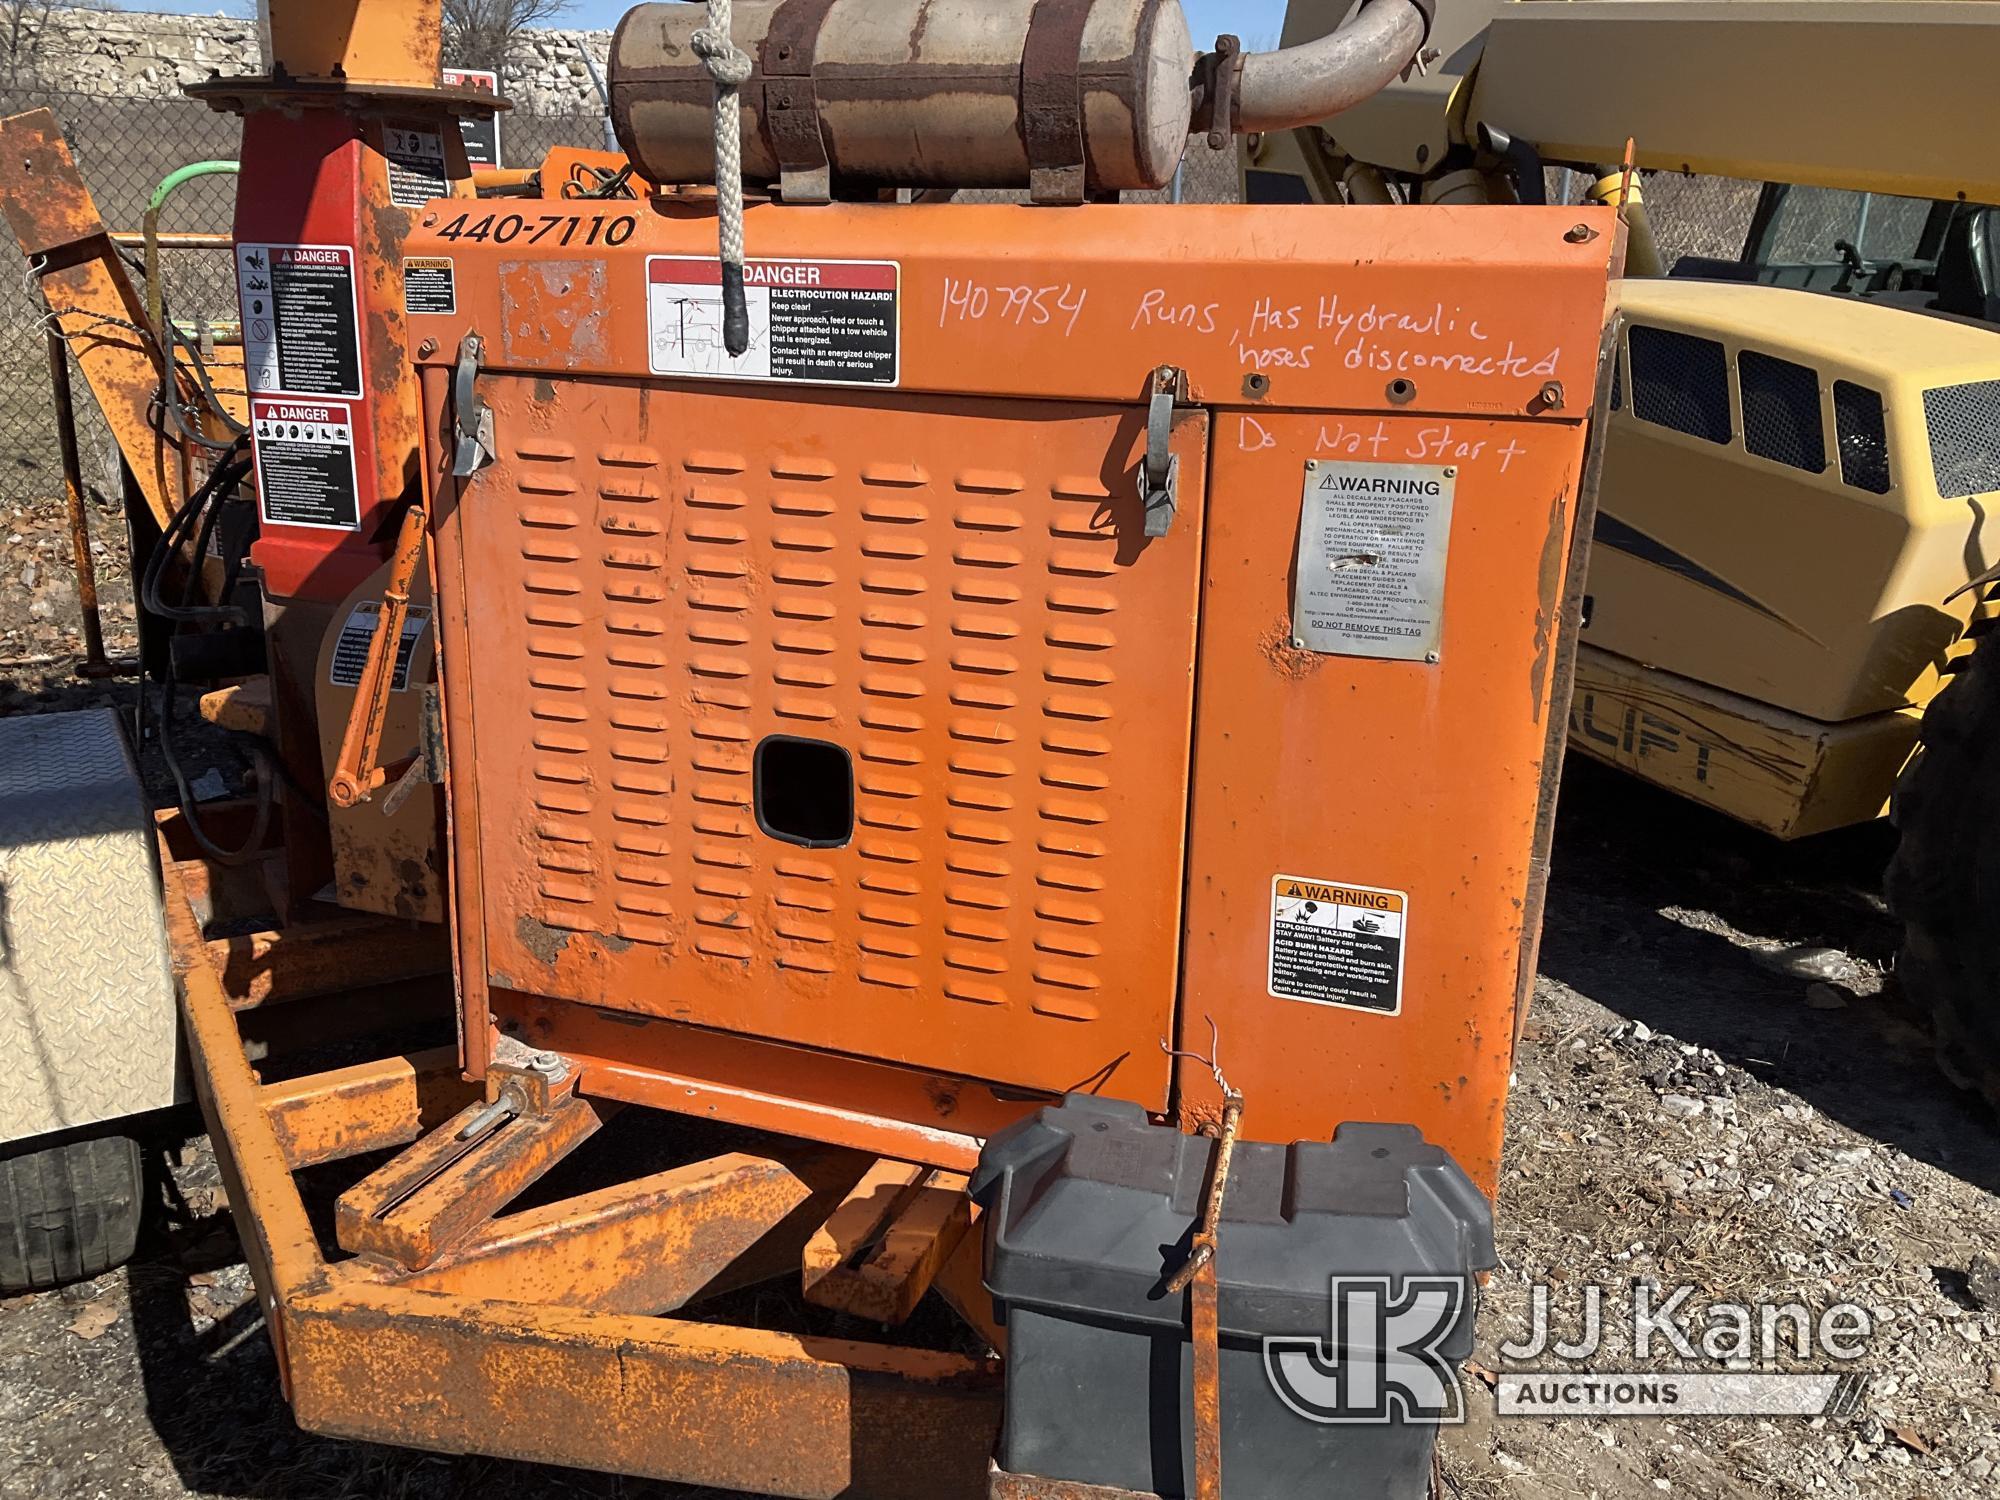 (Kansas City, MO) 2007 Altec DC1217 Chipper (12in Disc) Runs) (Seller States Bad Engine & Hydraulics